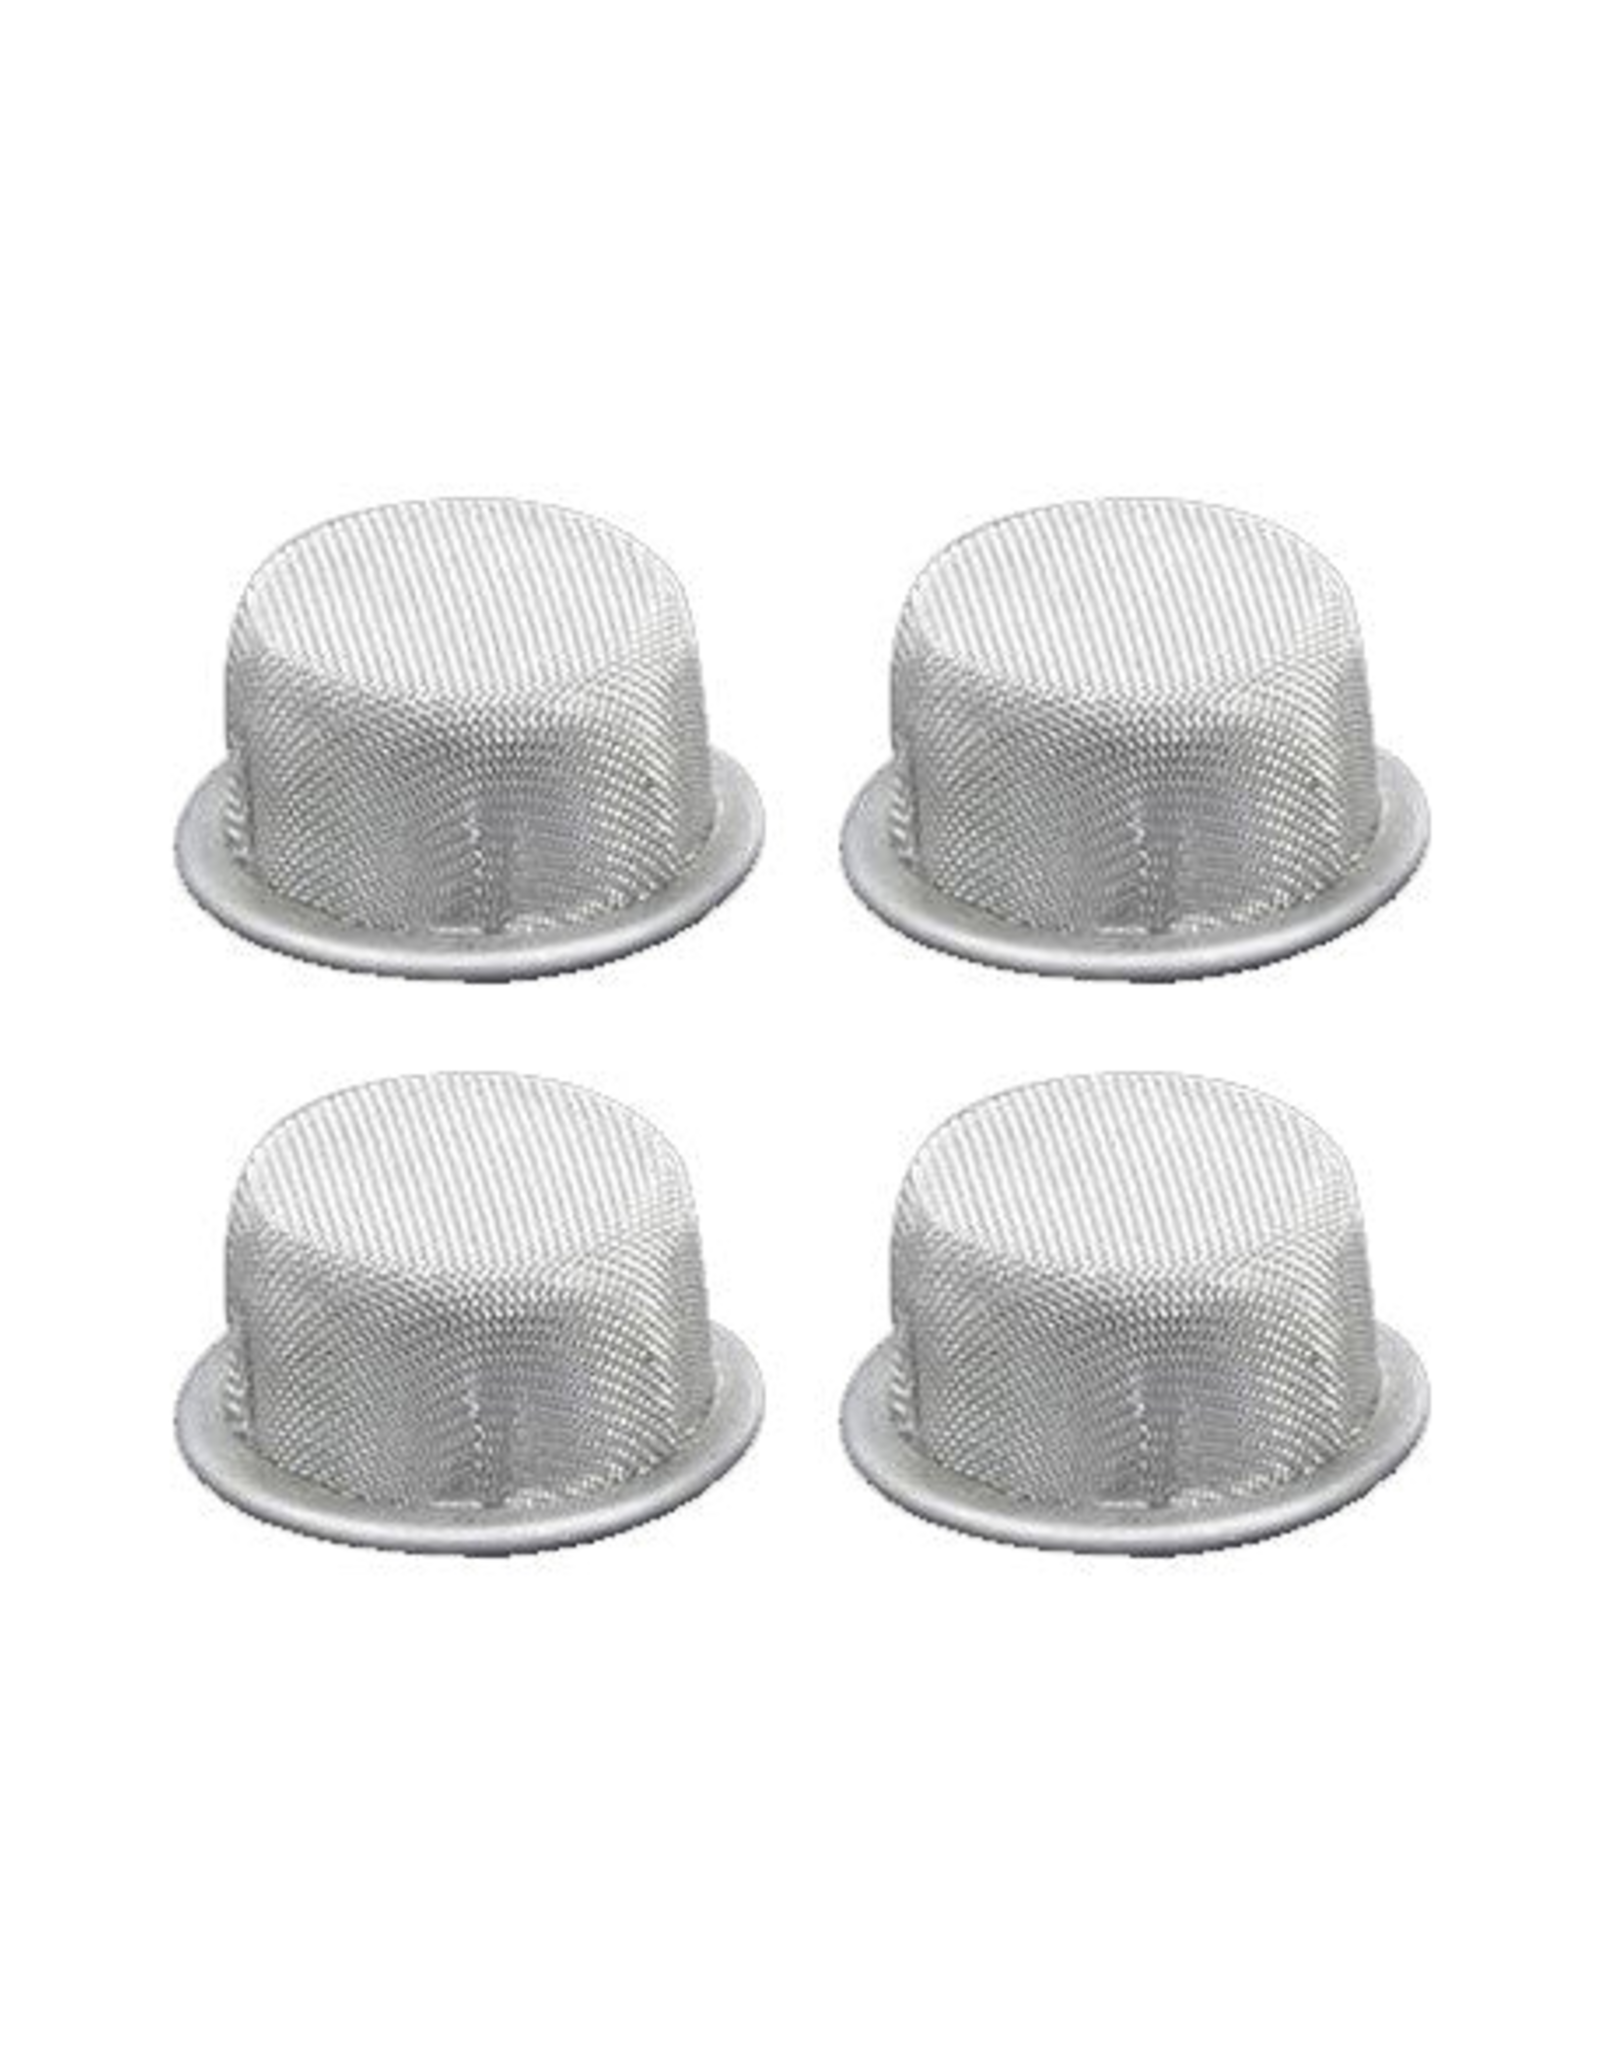 Arizer Arizer Extreme Q / V-Tower Dome Screen Pack (4 dome screens)